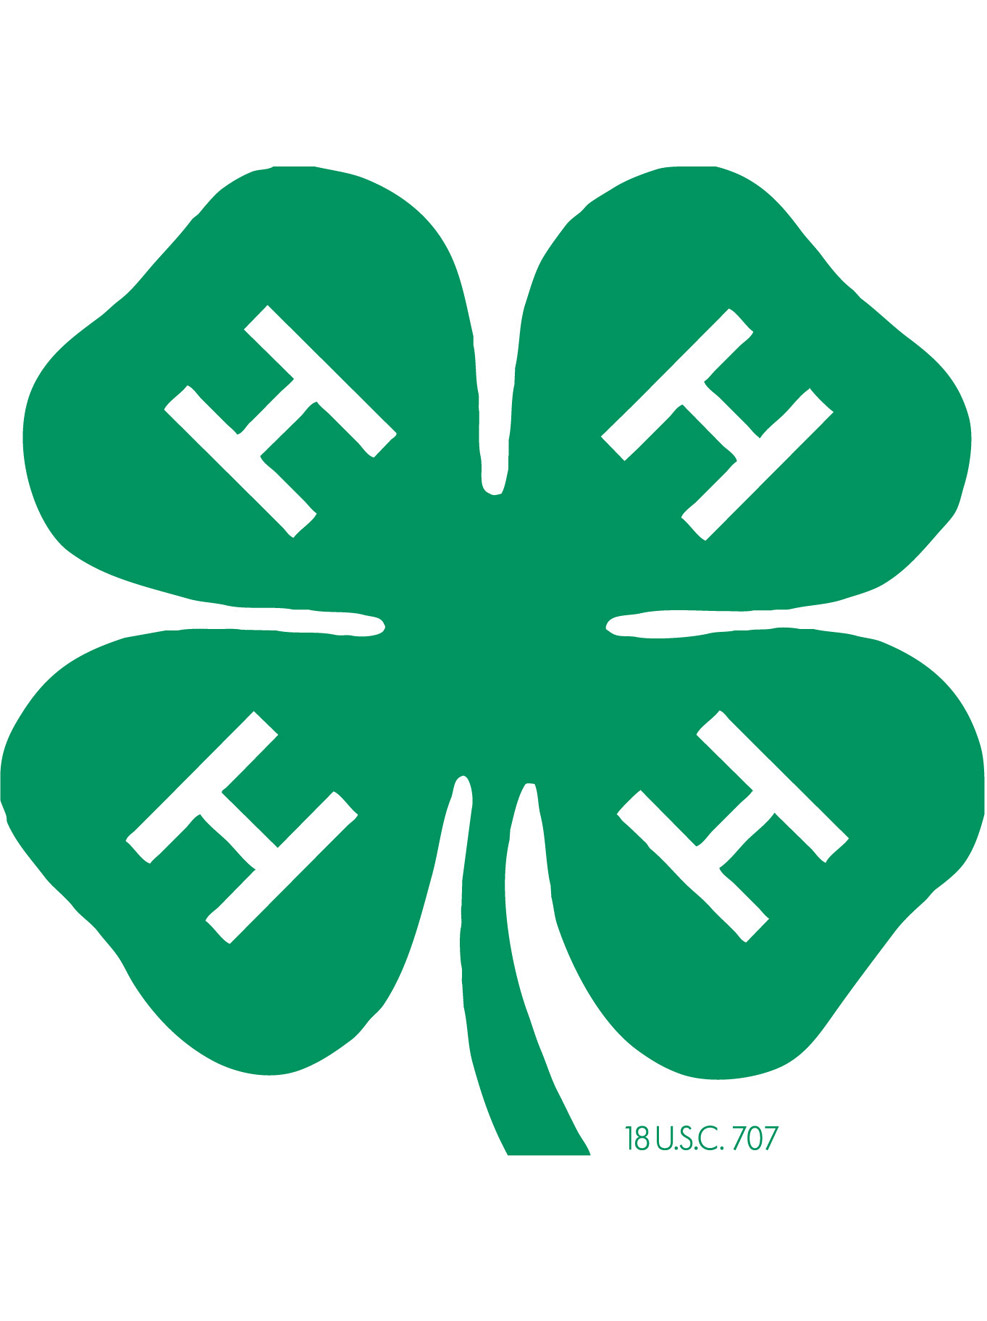 4-H is the nation’s largest positive youth development and youth mentoring organization, empowering six million young people in the U.S.